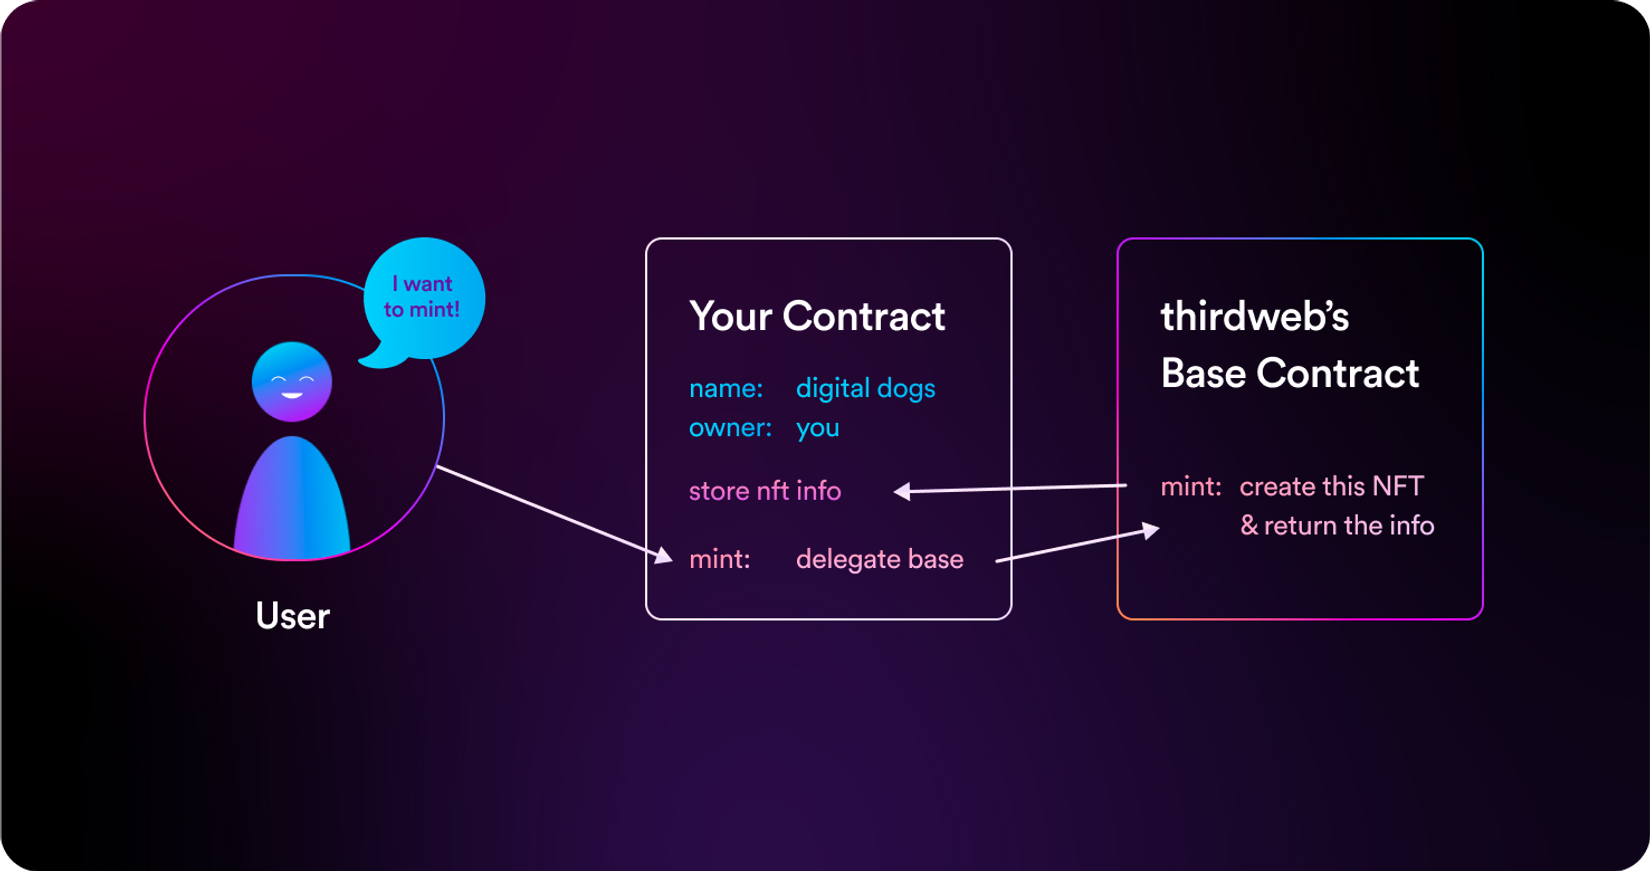 How Thirdweb's contracts work